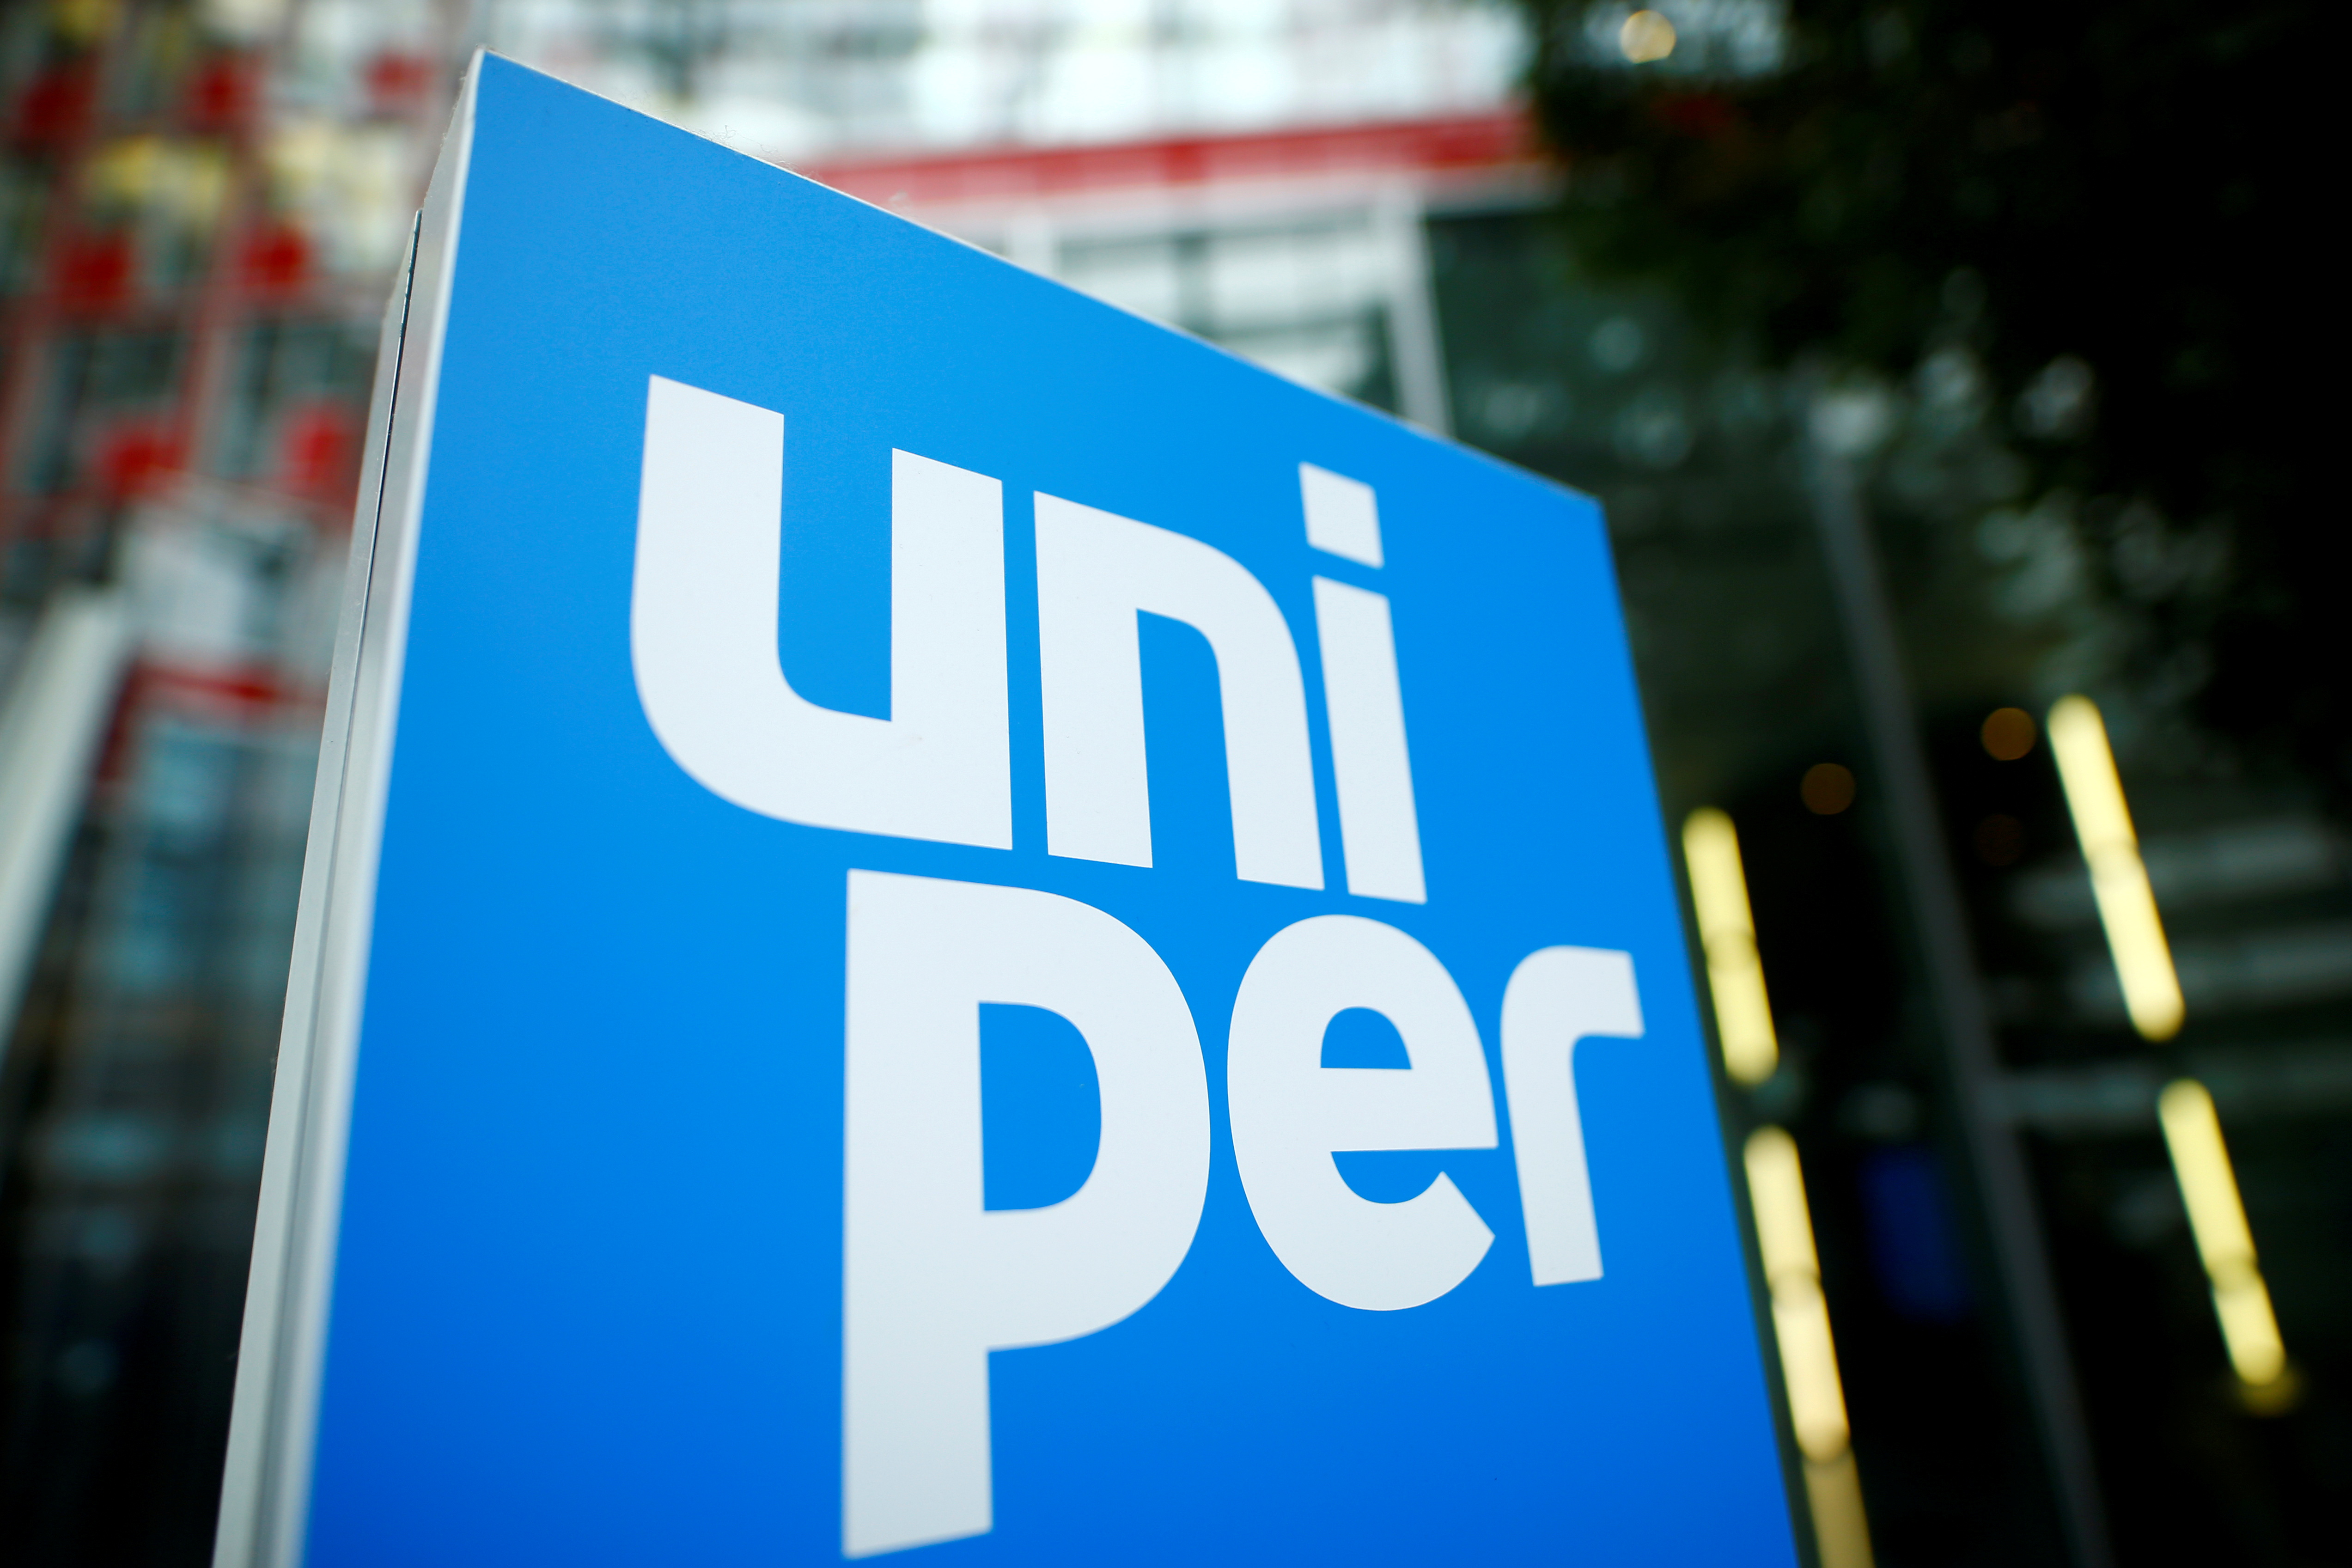 The logo of German energy utility company Uniper SE is pictured in the company's headquarters in Duesseldorf, Germany, March 10, 2020. REUTERS/Thilo Schmuelgen